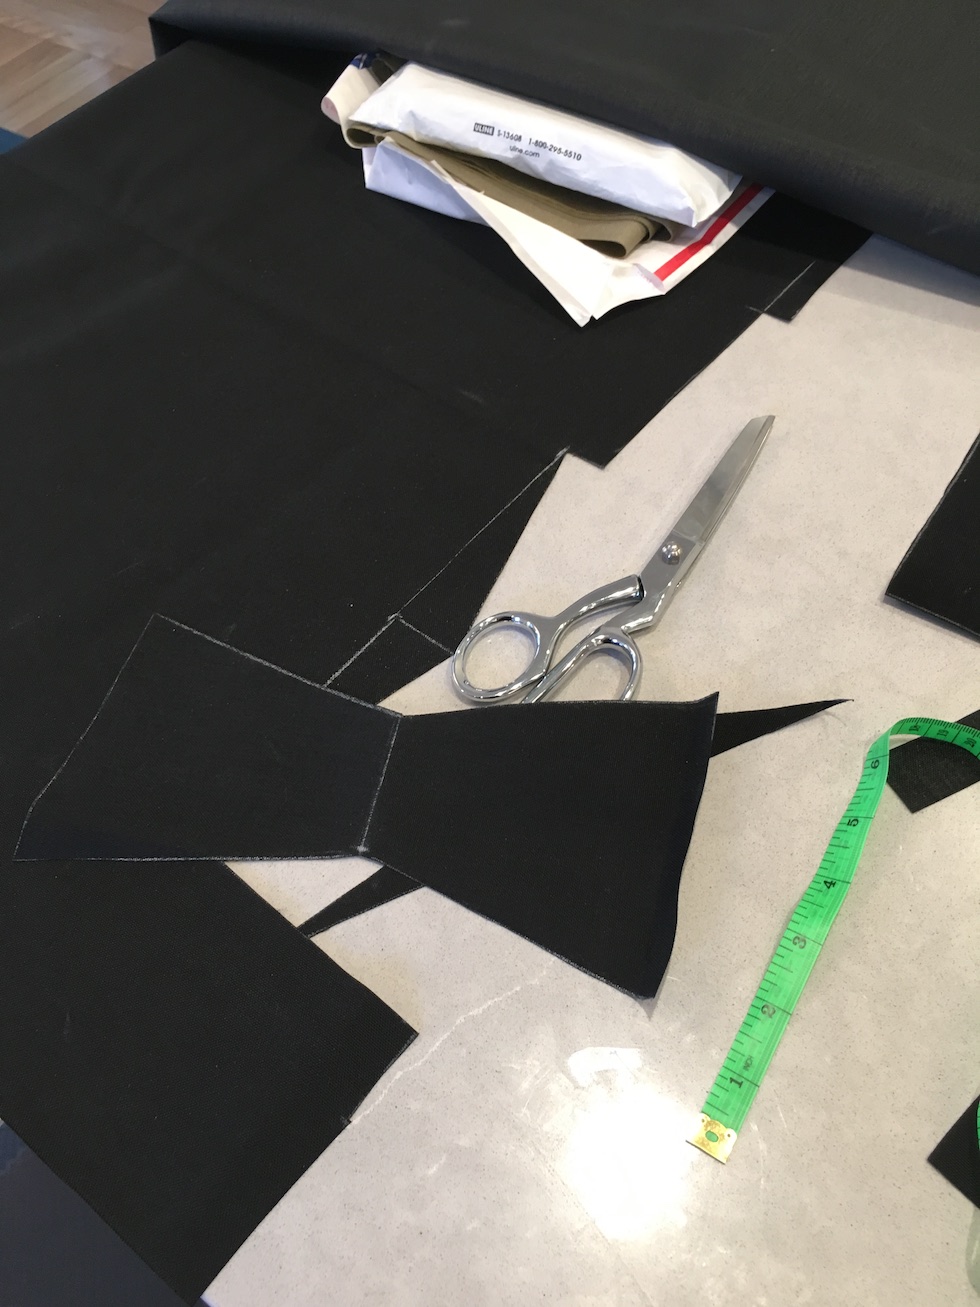 Cutting the tabs for the hip belt wings. Learning to make fewer cuts by folding to get two pieces for one.